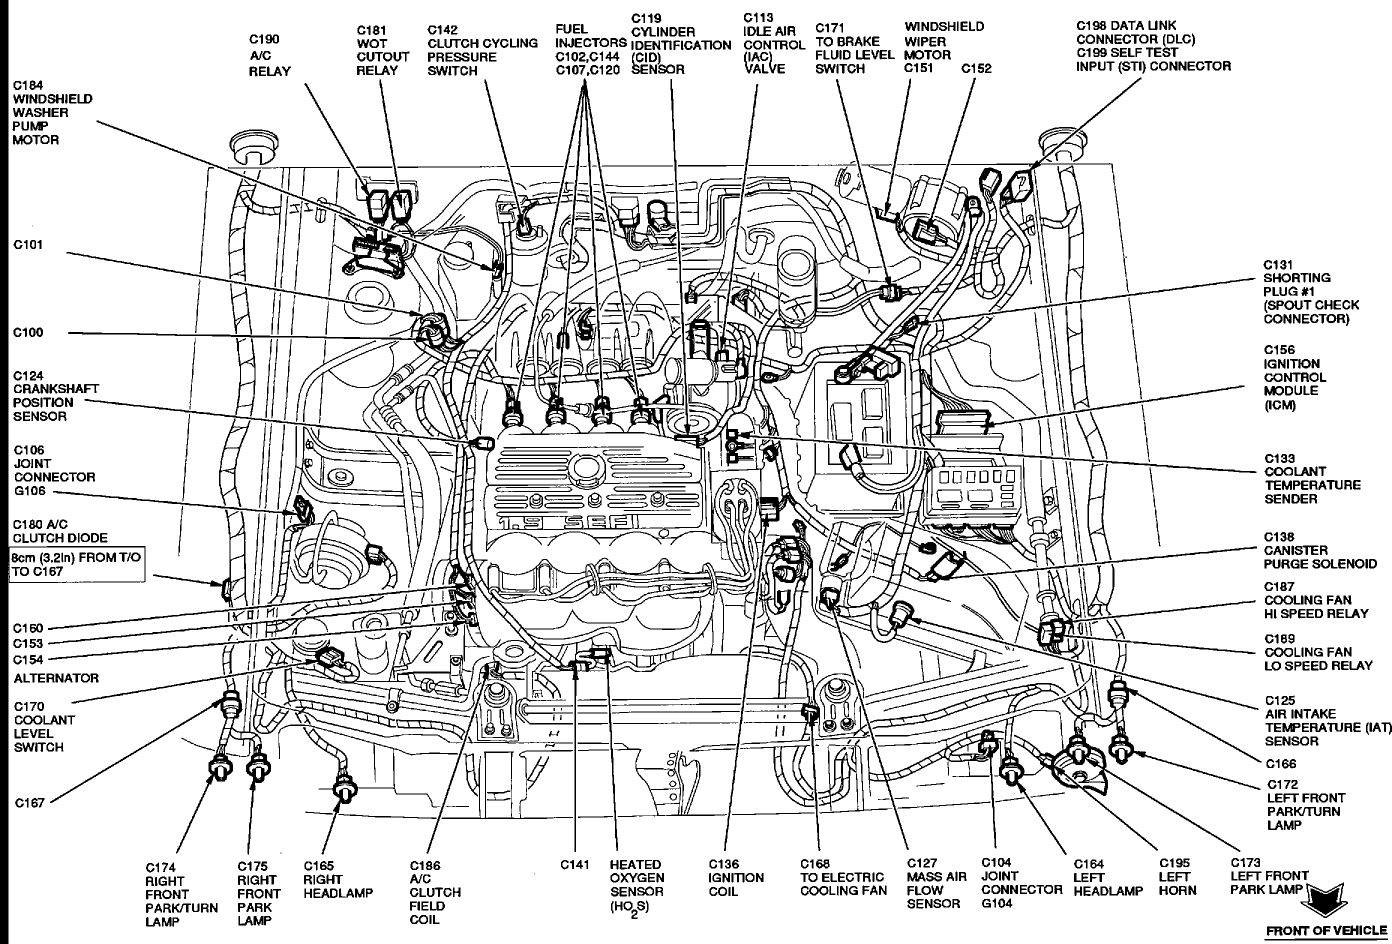 96 Ford Escort Wiring Diagram from www.city-data.com